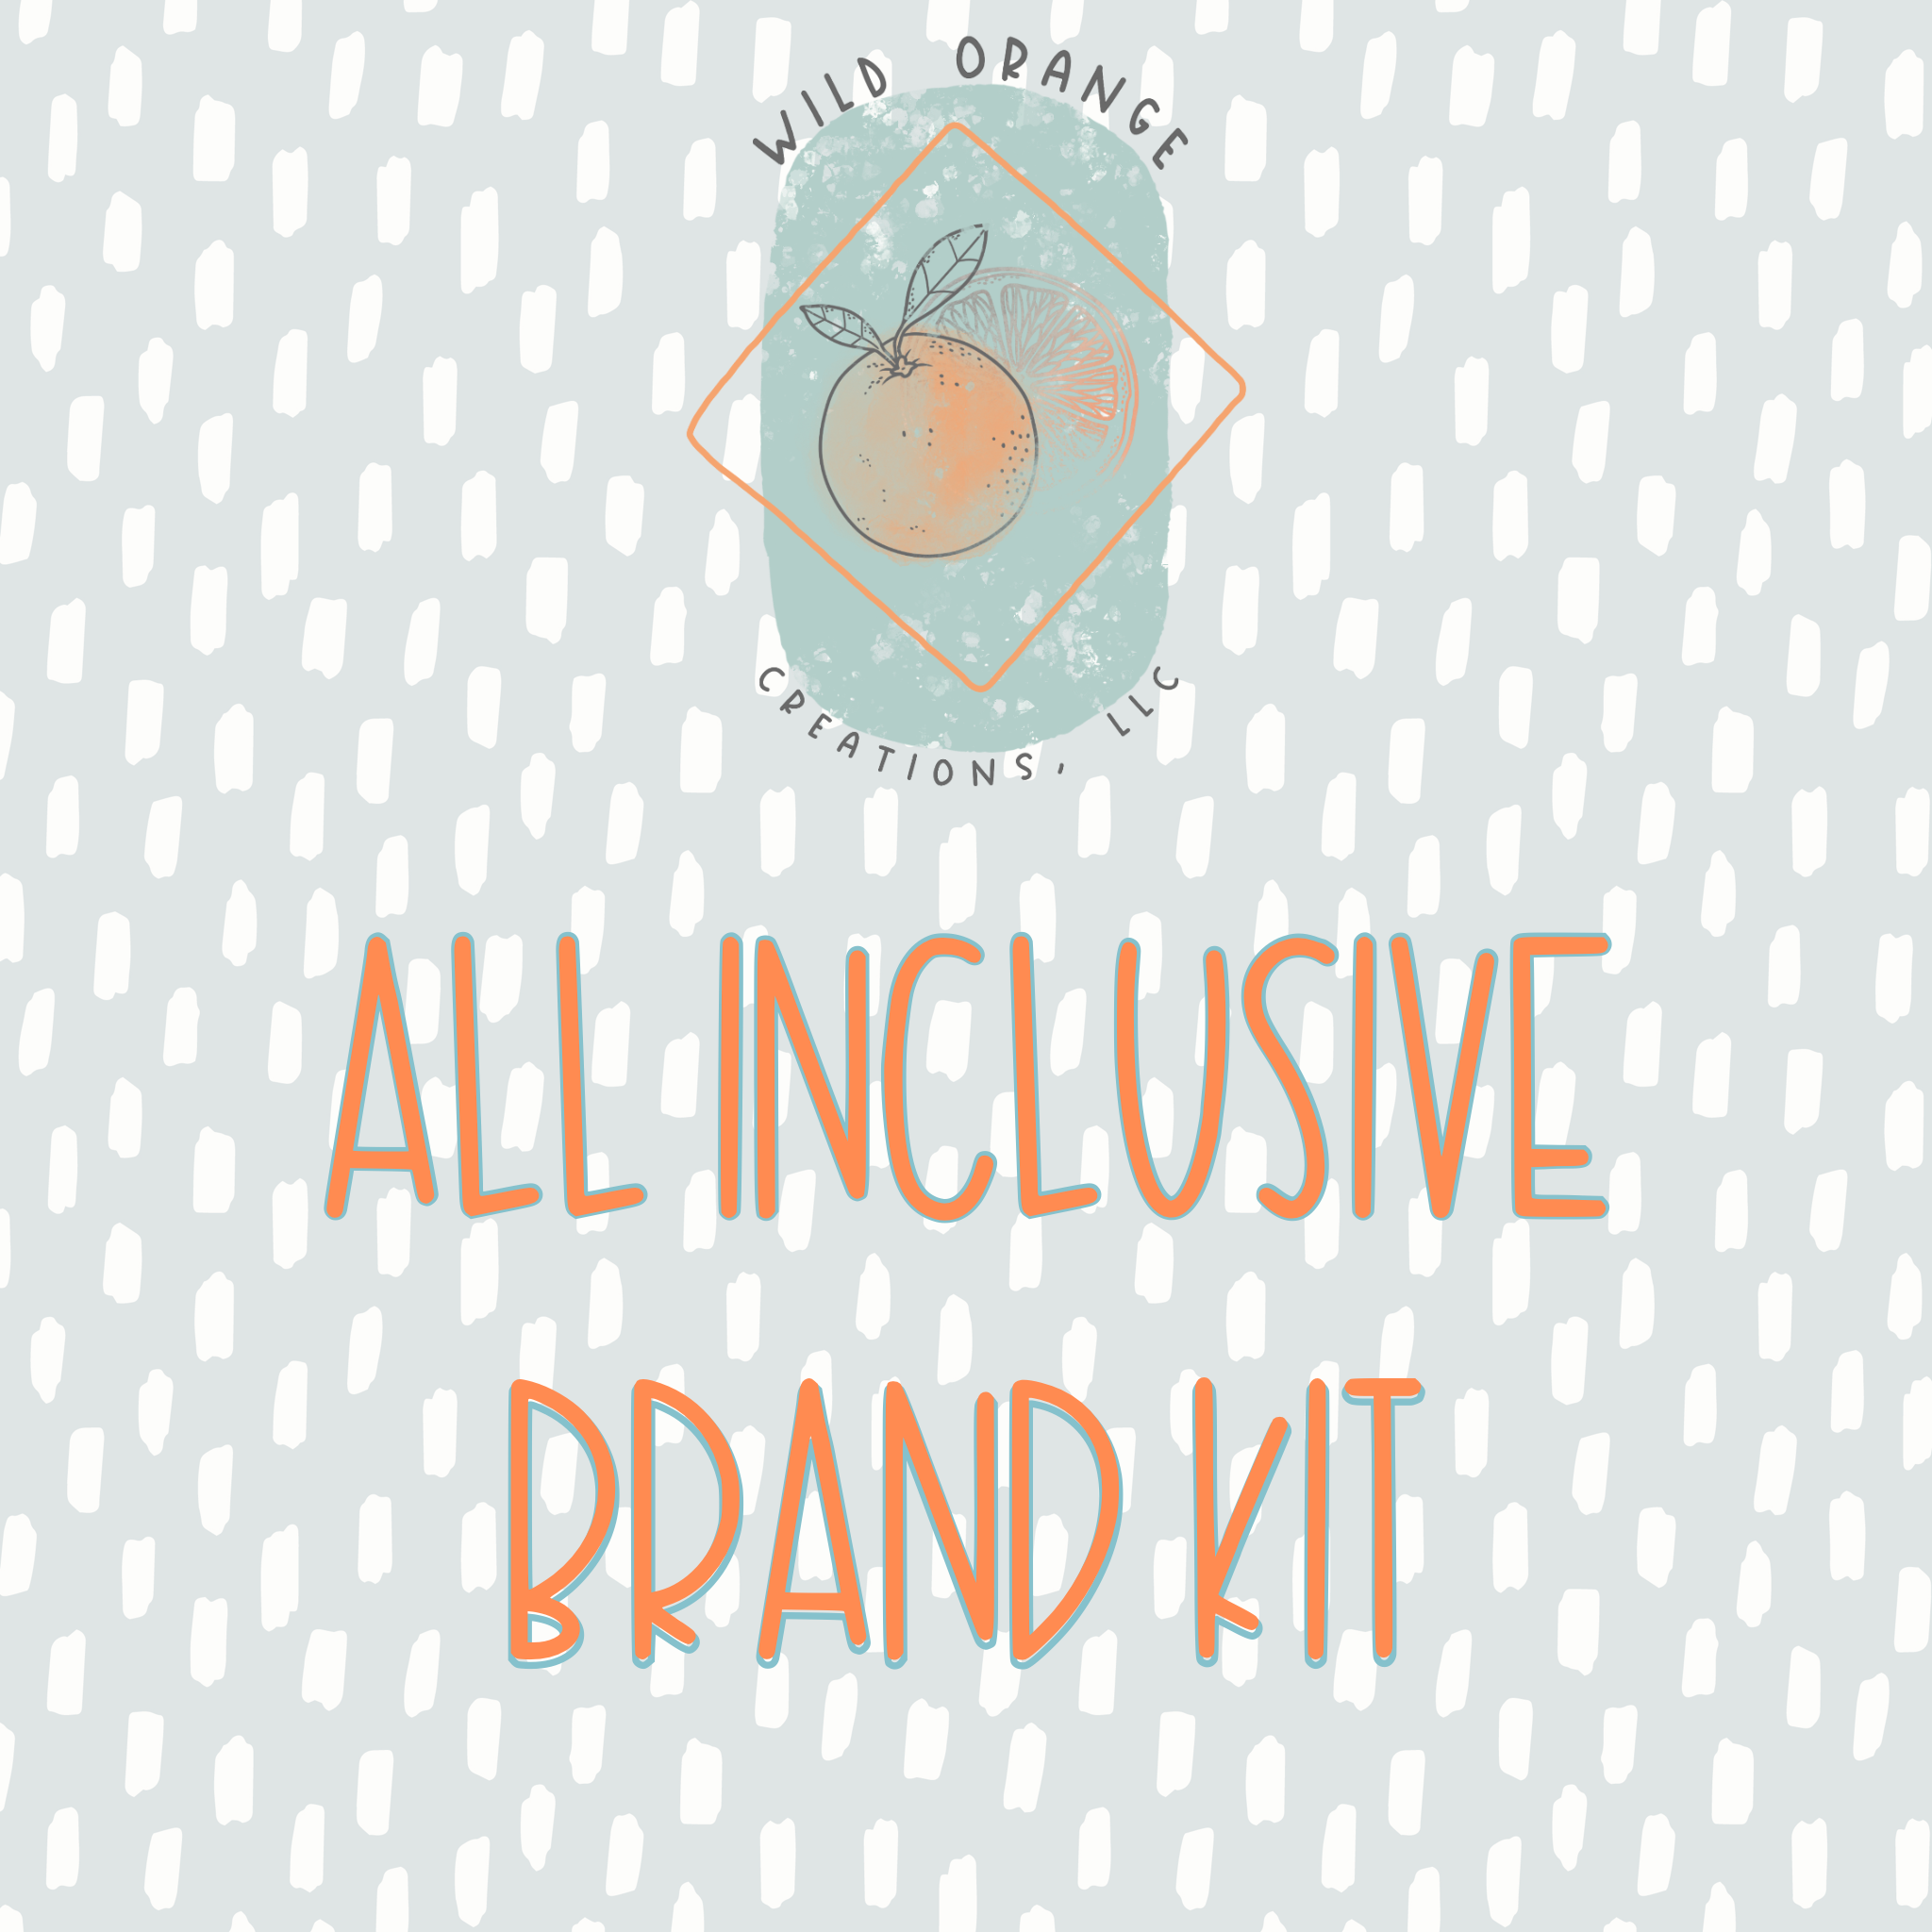 The All Inclusive Brand Kit